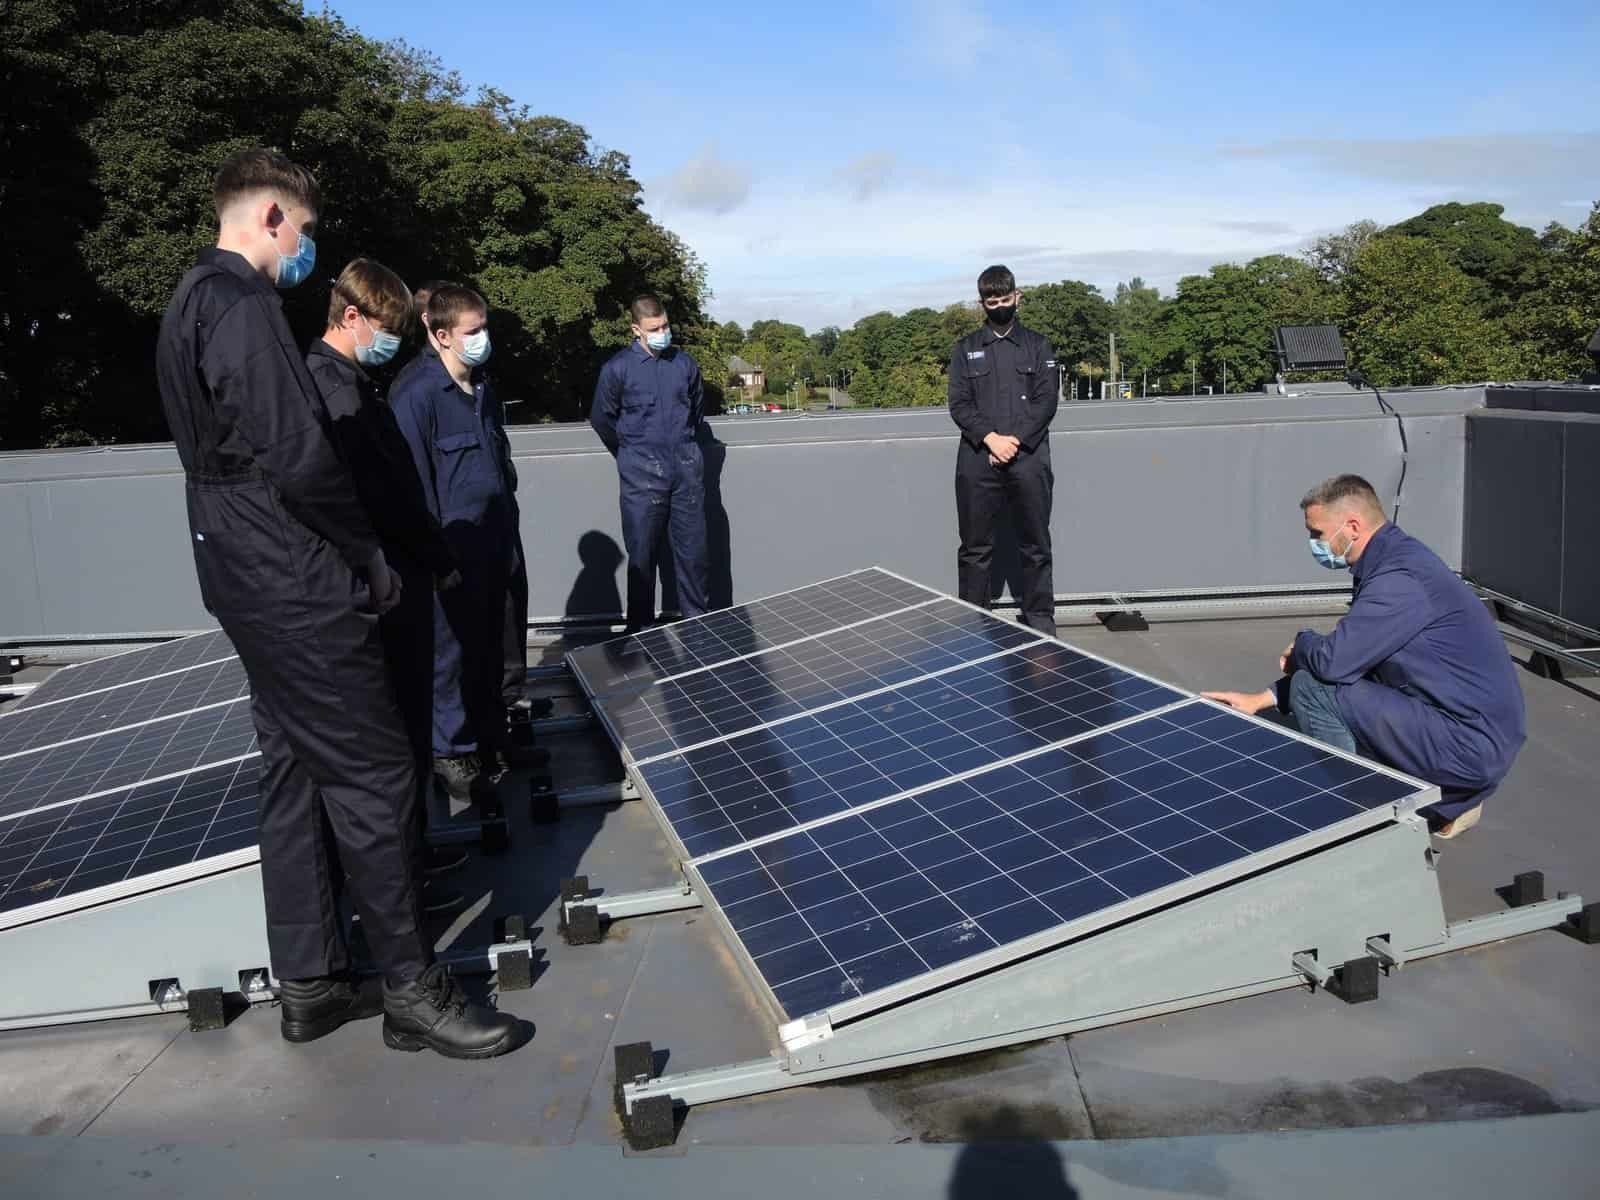 Green energy students around solar panels at Dumfries and Galloway College